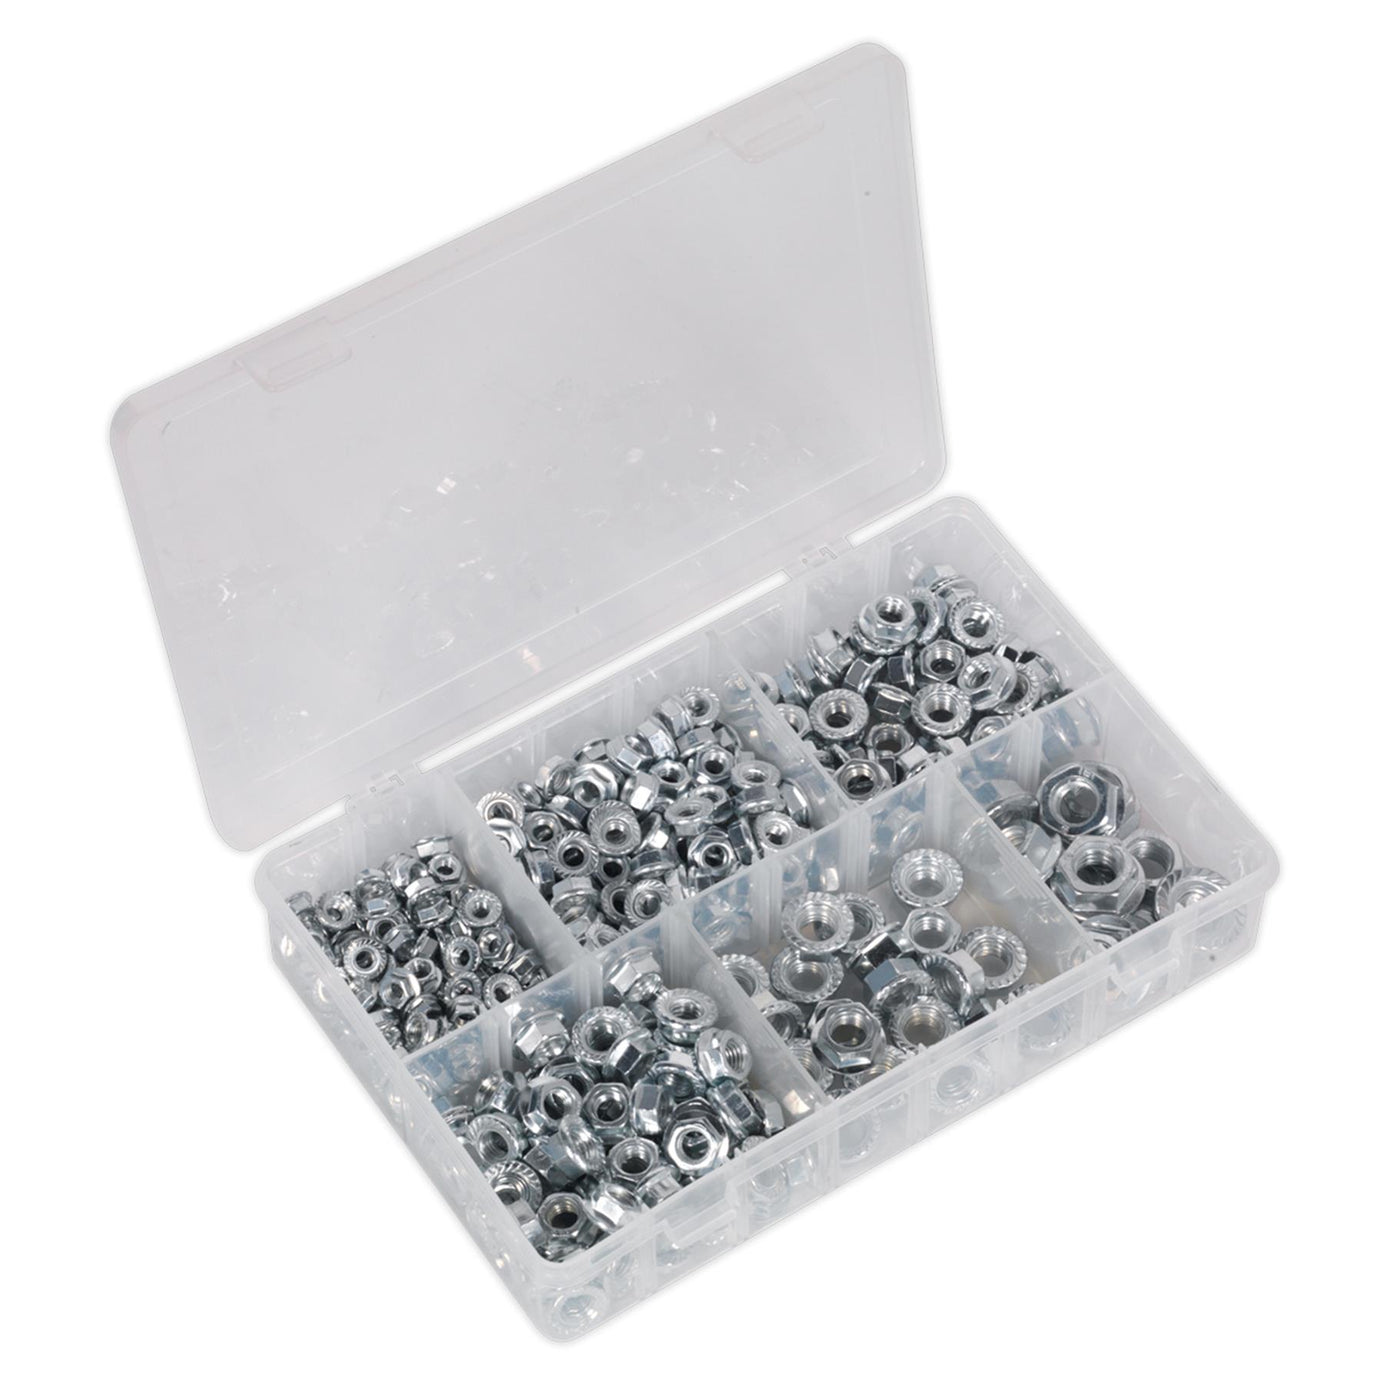 Sealey Assortment Kit 390pc M5-M12 Stainless Steel Flange Nuts Serrated Metric